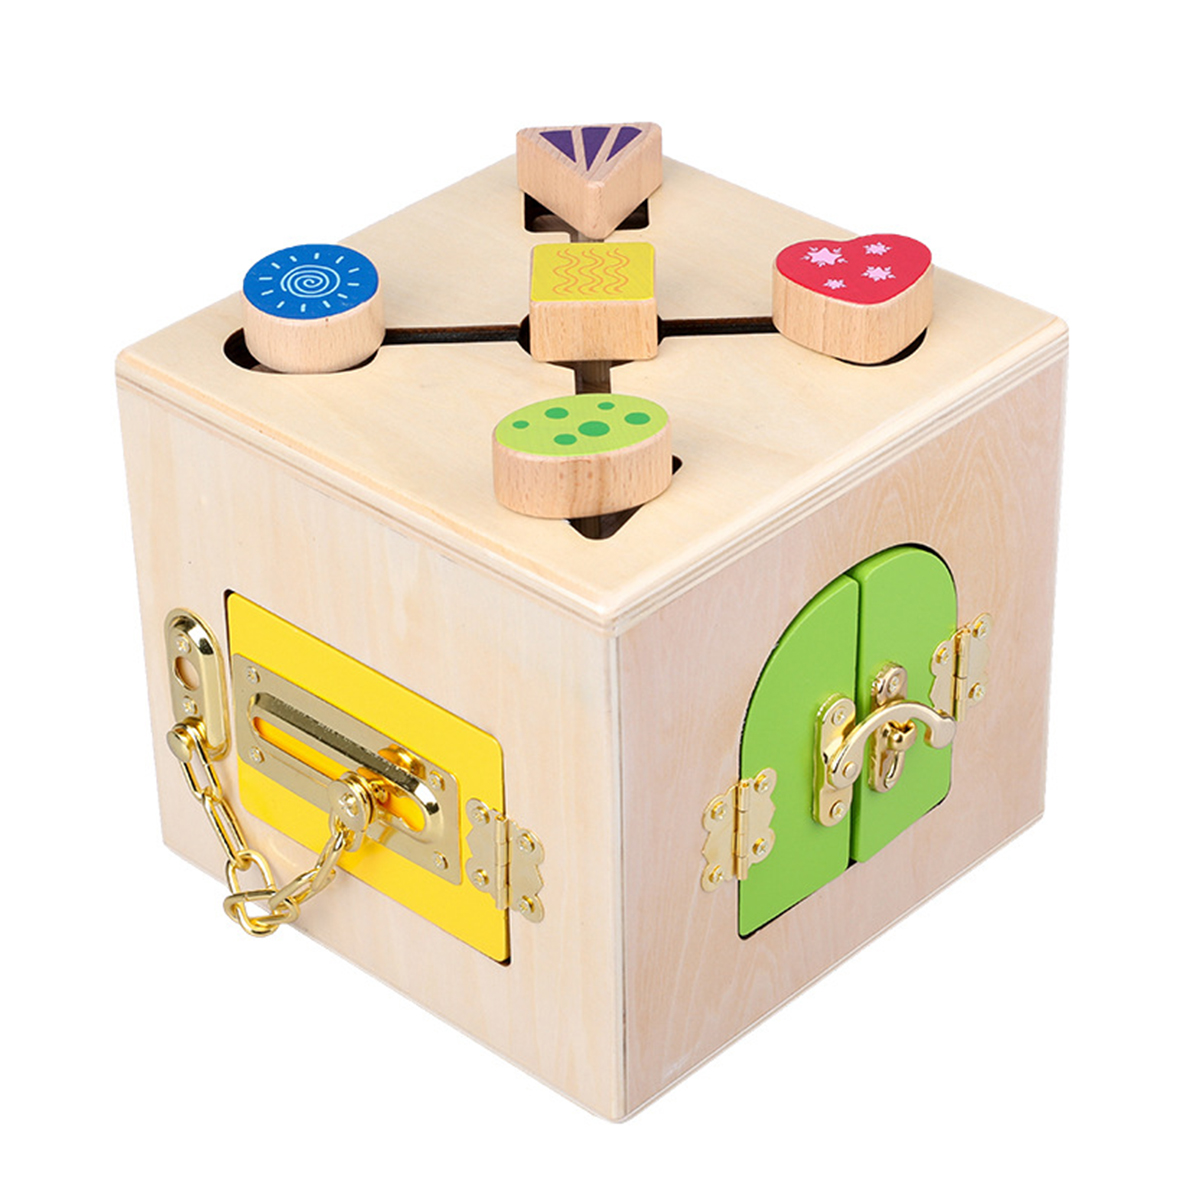 

Wooden Montessori Practical Material Little Lock Box Kids Early Educational Toys